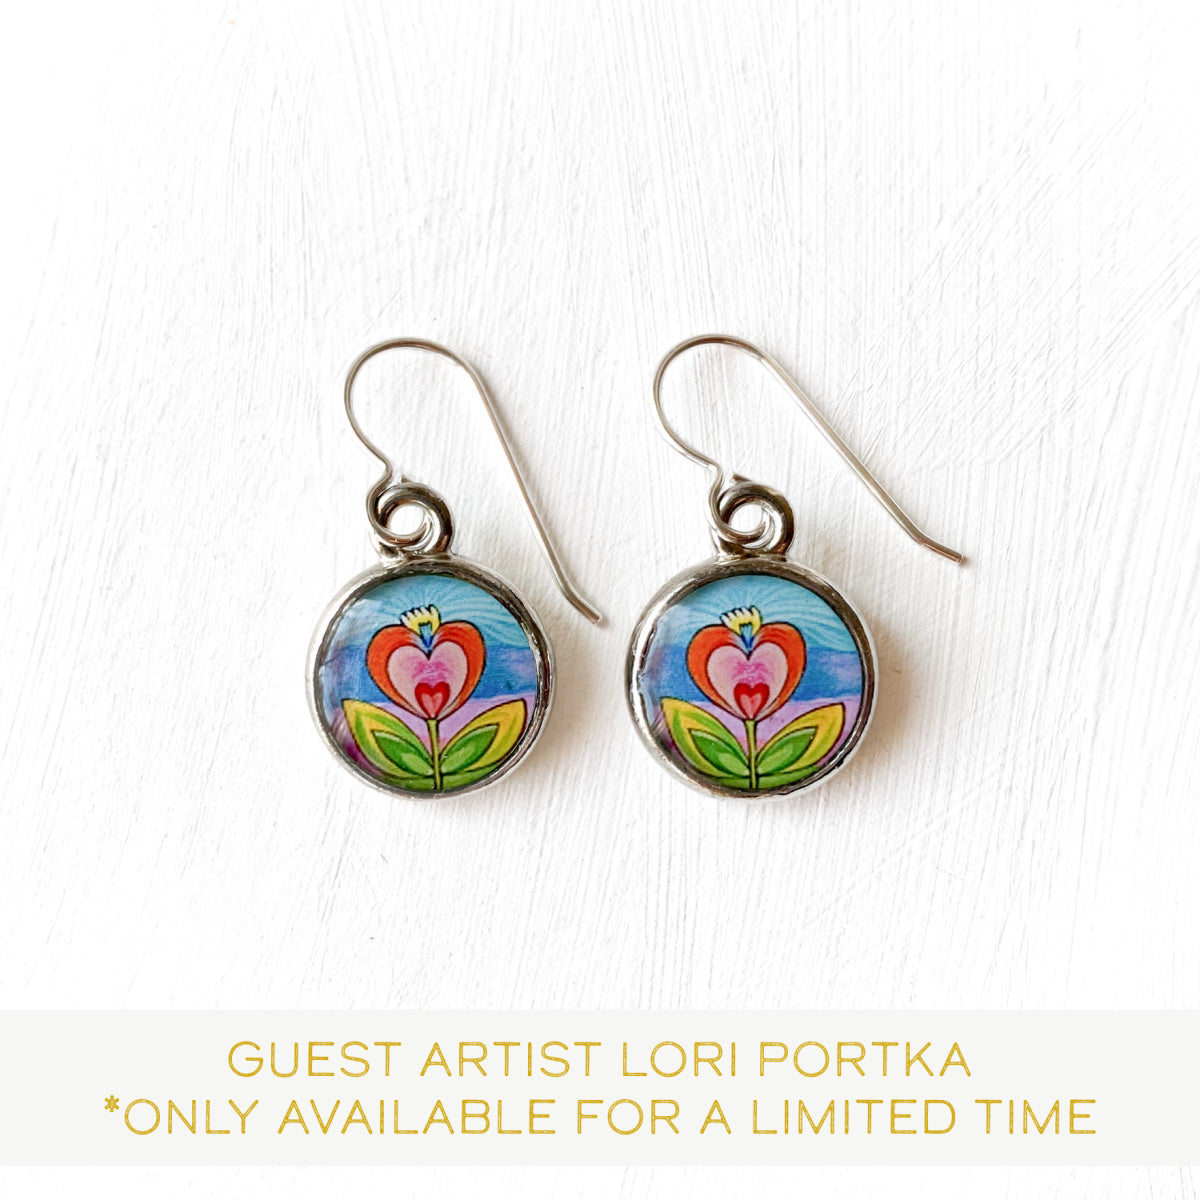 a pair of earrings with flowers painted on them